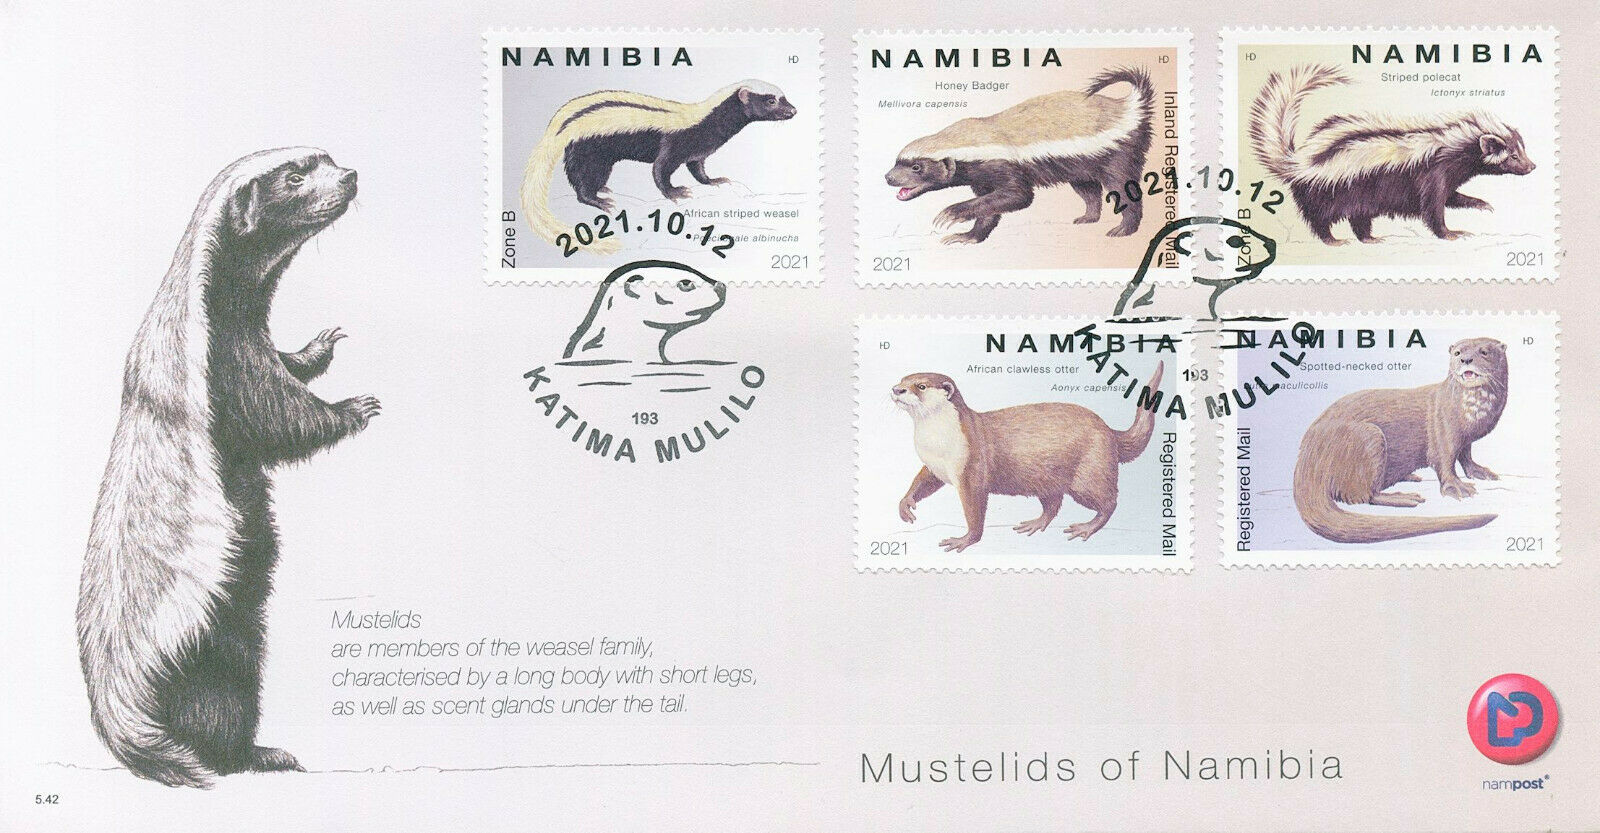 Namibia 2021 FDC Wild Animals Stamps Mustelids Weasels Badgers Otters 5v Set